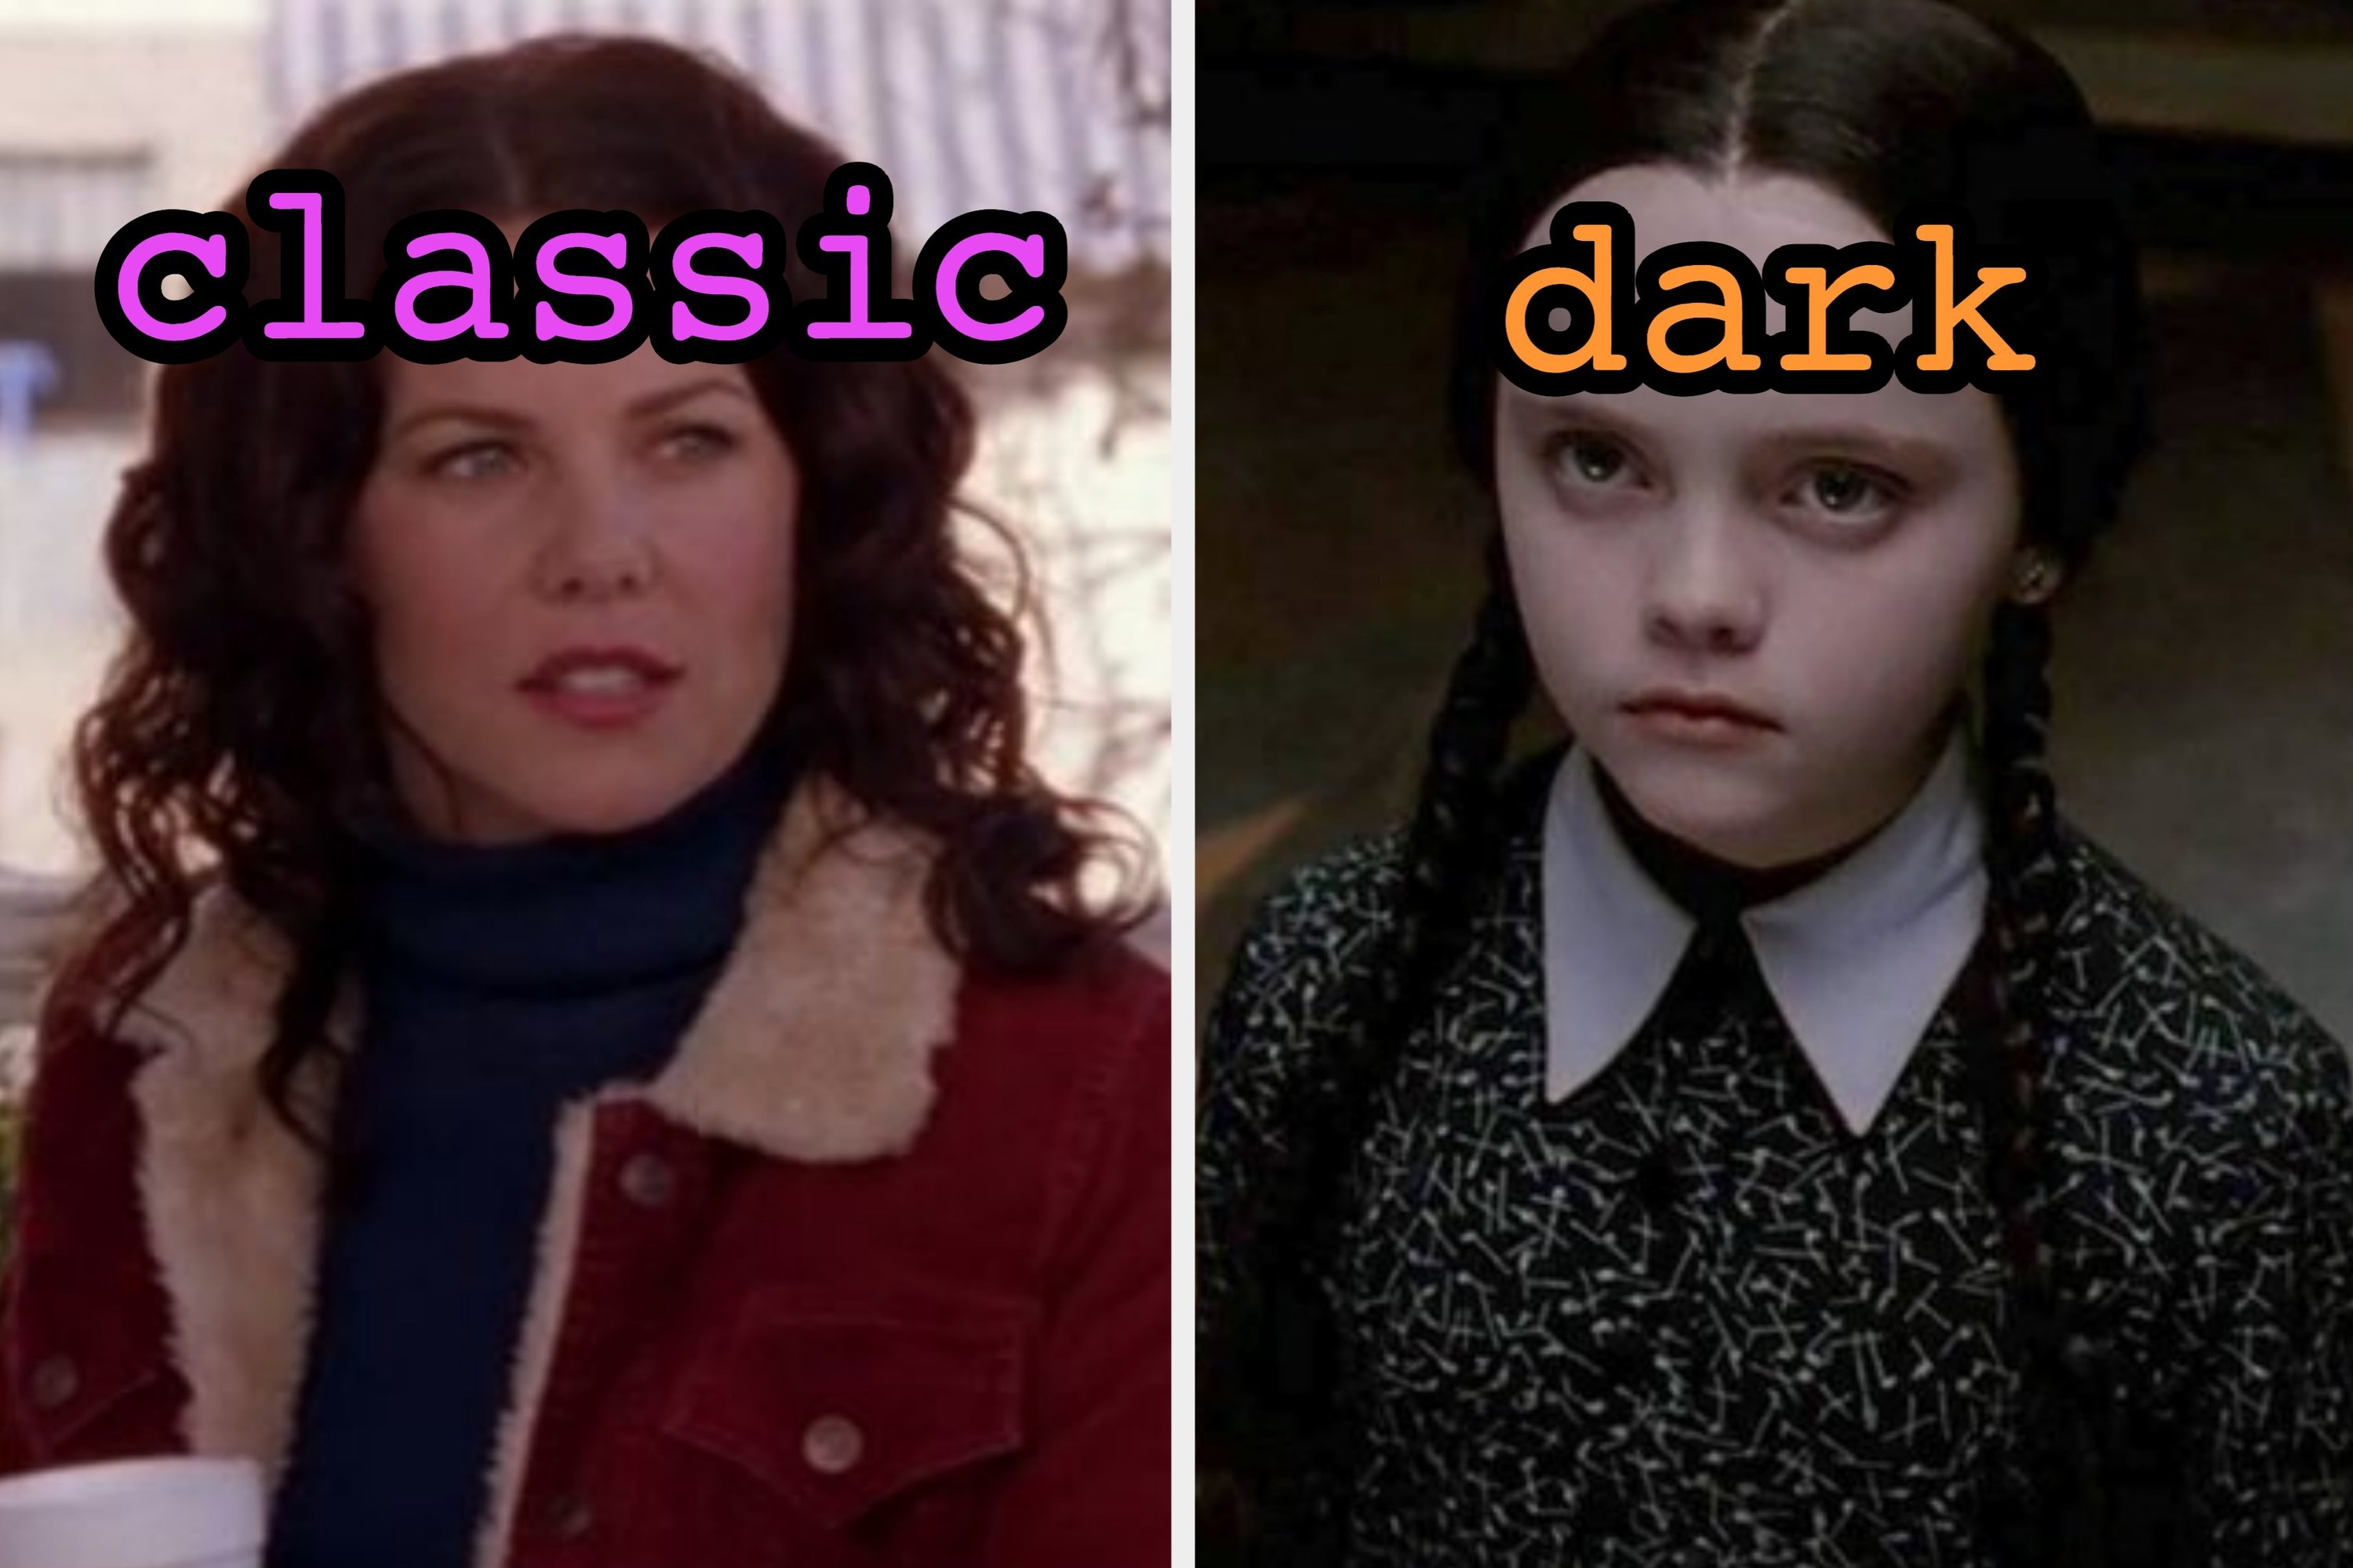 On the left, Lorelai from Gilmore Girls wearing a coat with a fur-lines collar labeled classic, and on the right, Wednesday Addams wearing a dark dress with a collar labeled dark